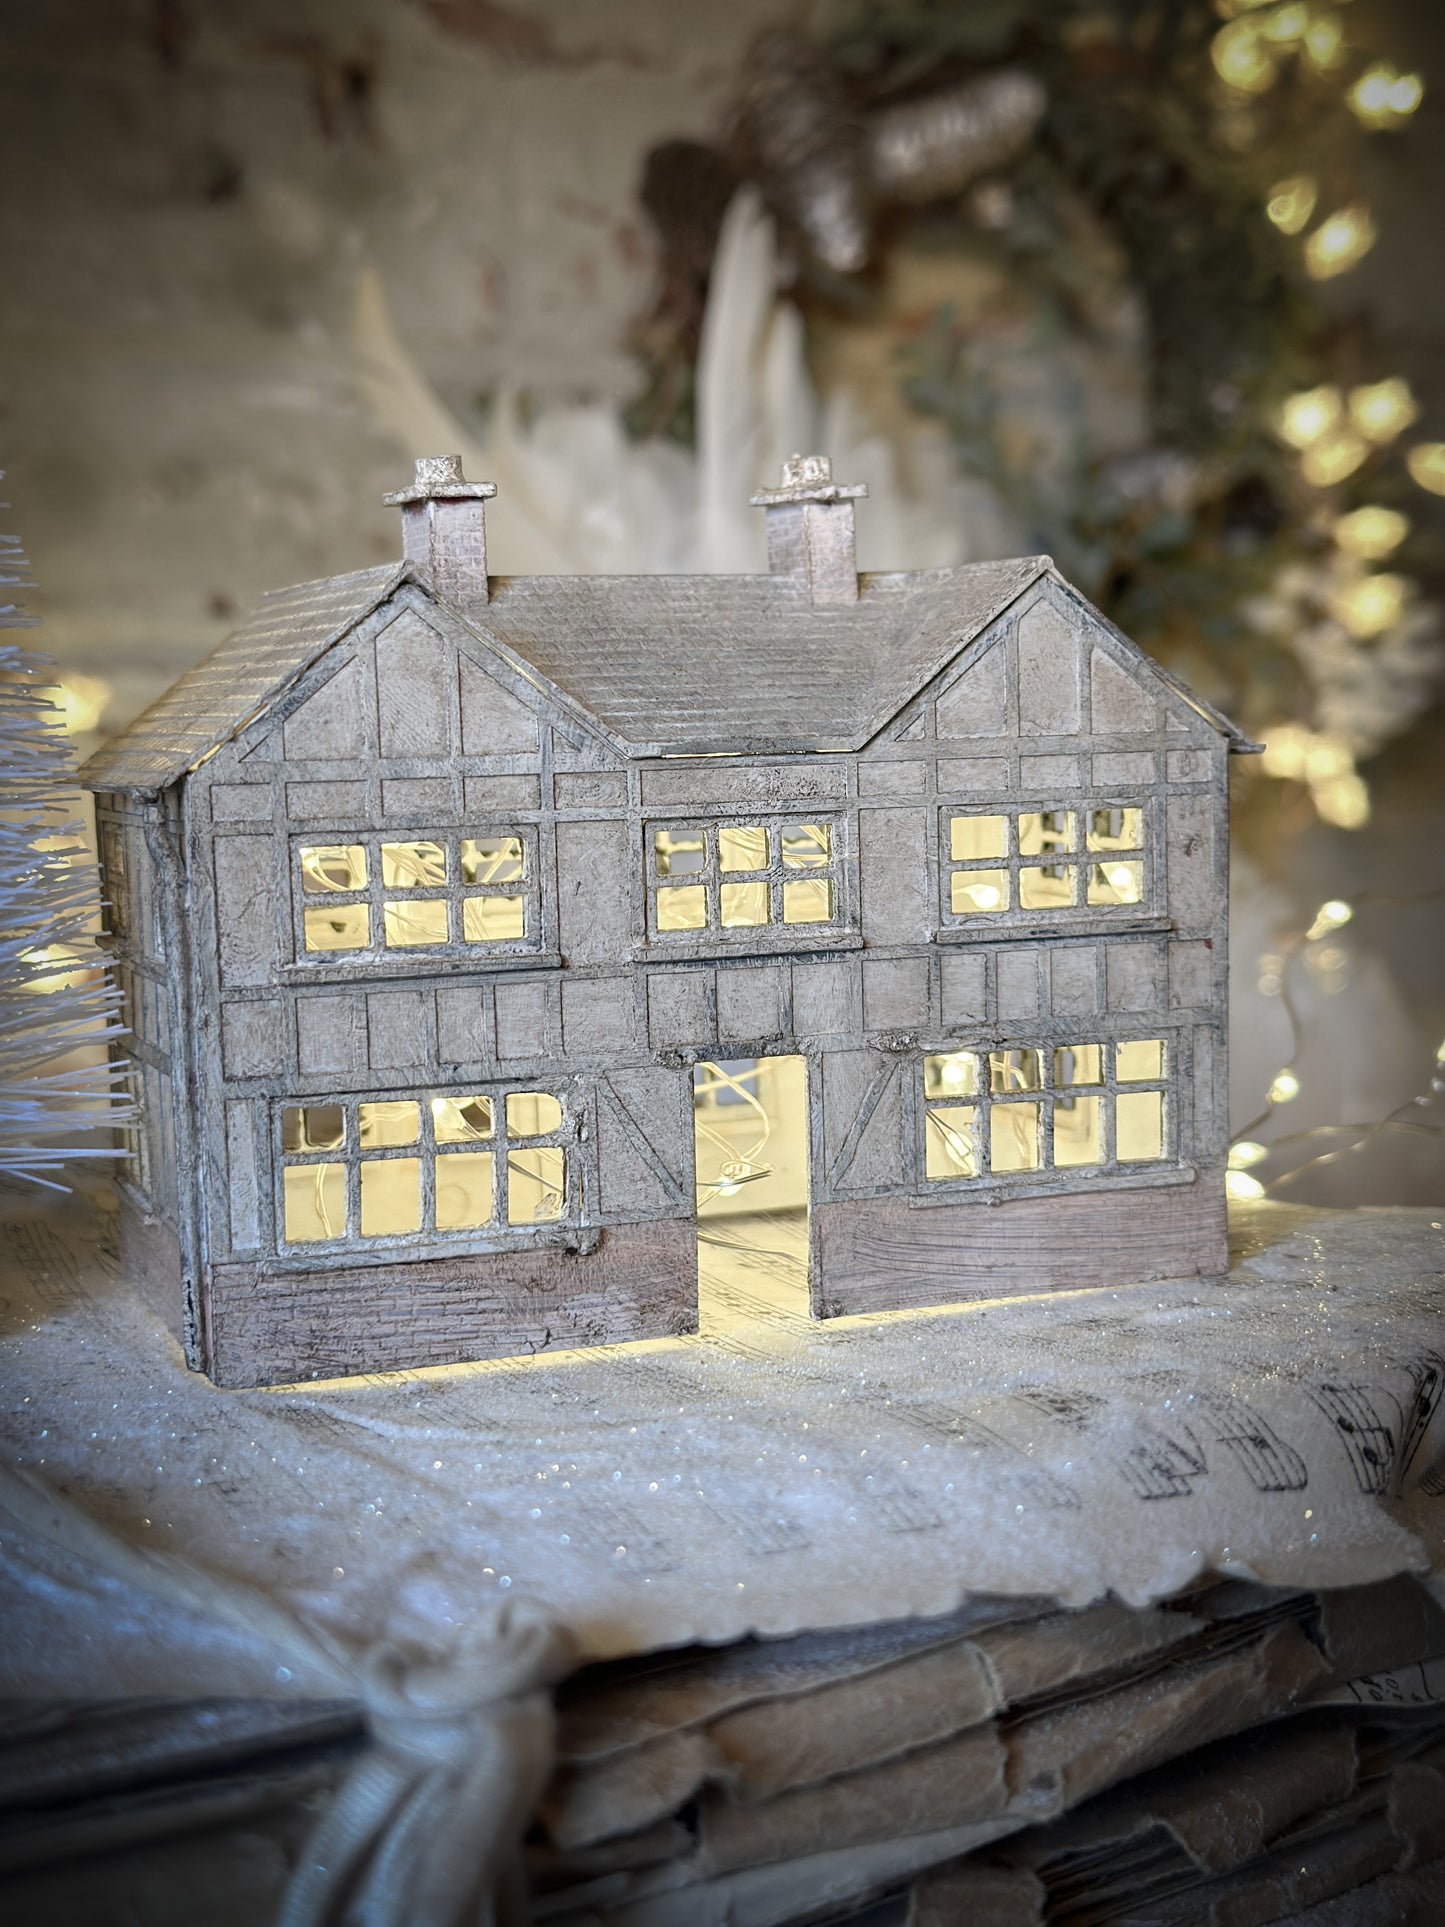 A reworked 1950’s model German Putz thatched Manor House